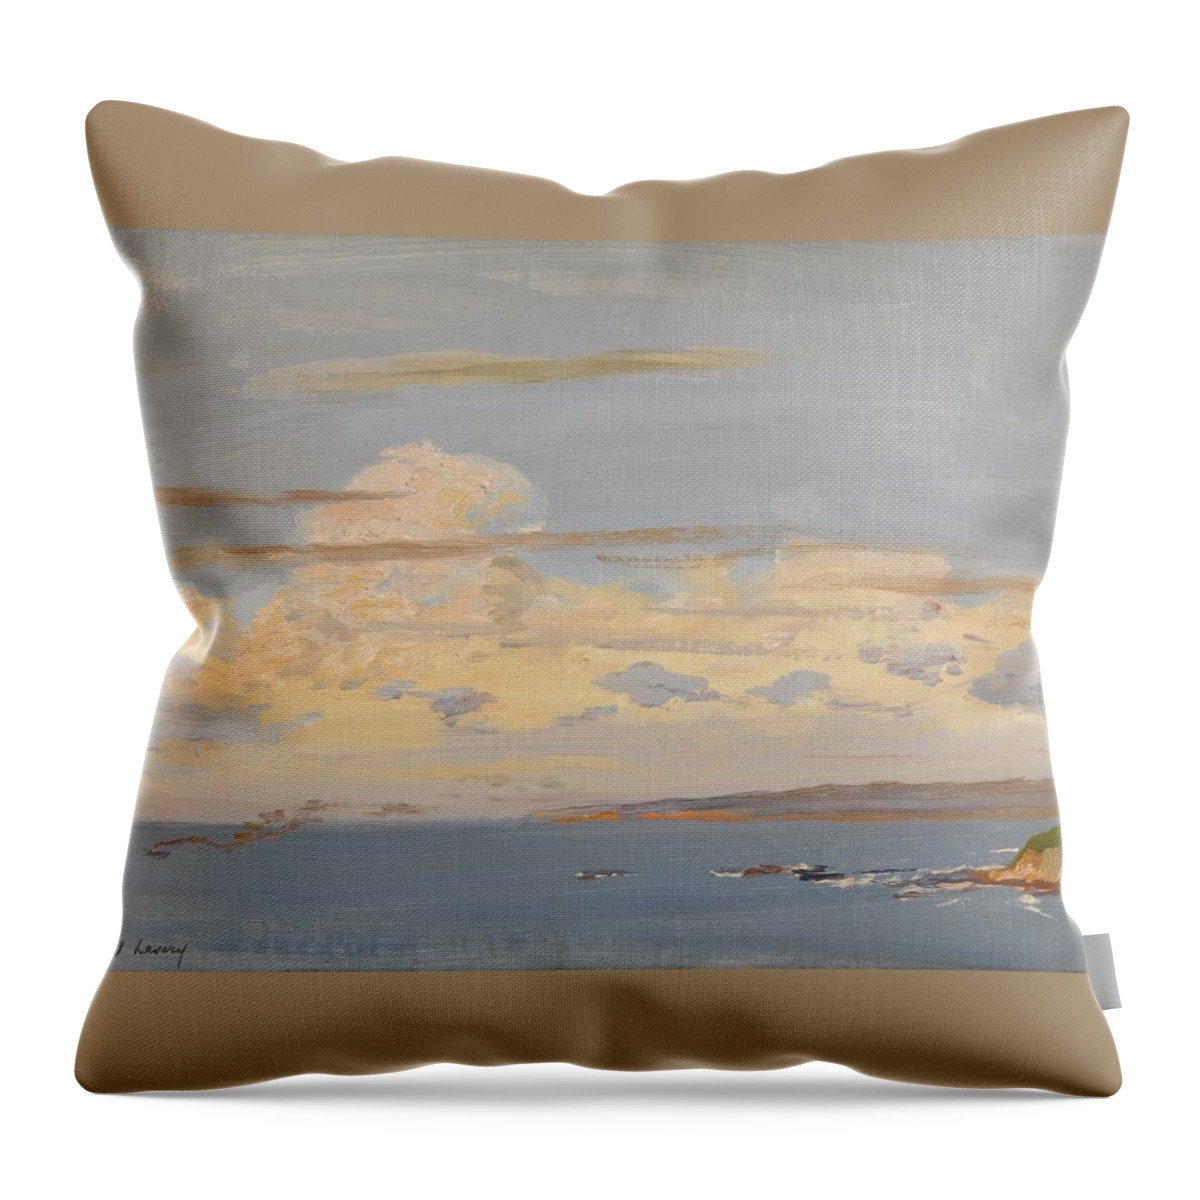 Sir John Lavery Throw Pillow featuring the painting Evening Tangier by MotionAge Designs